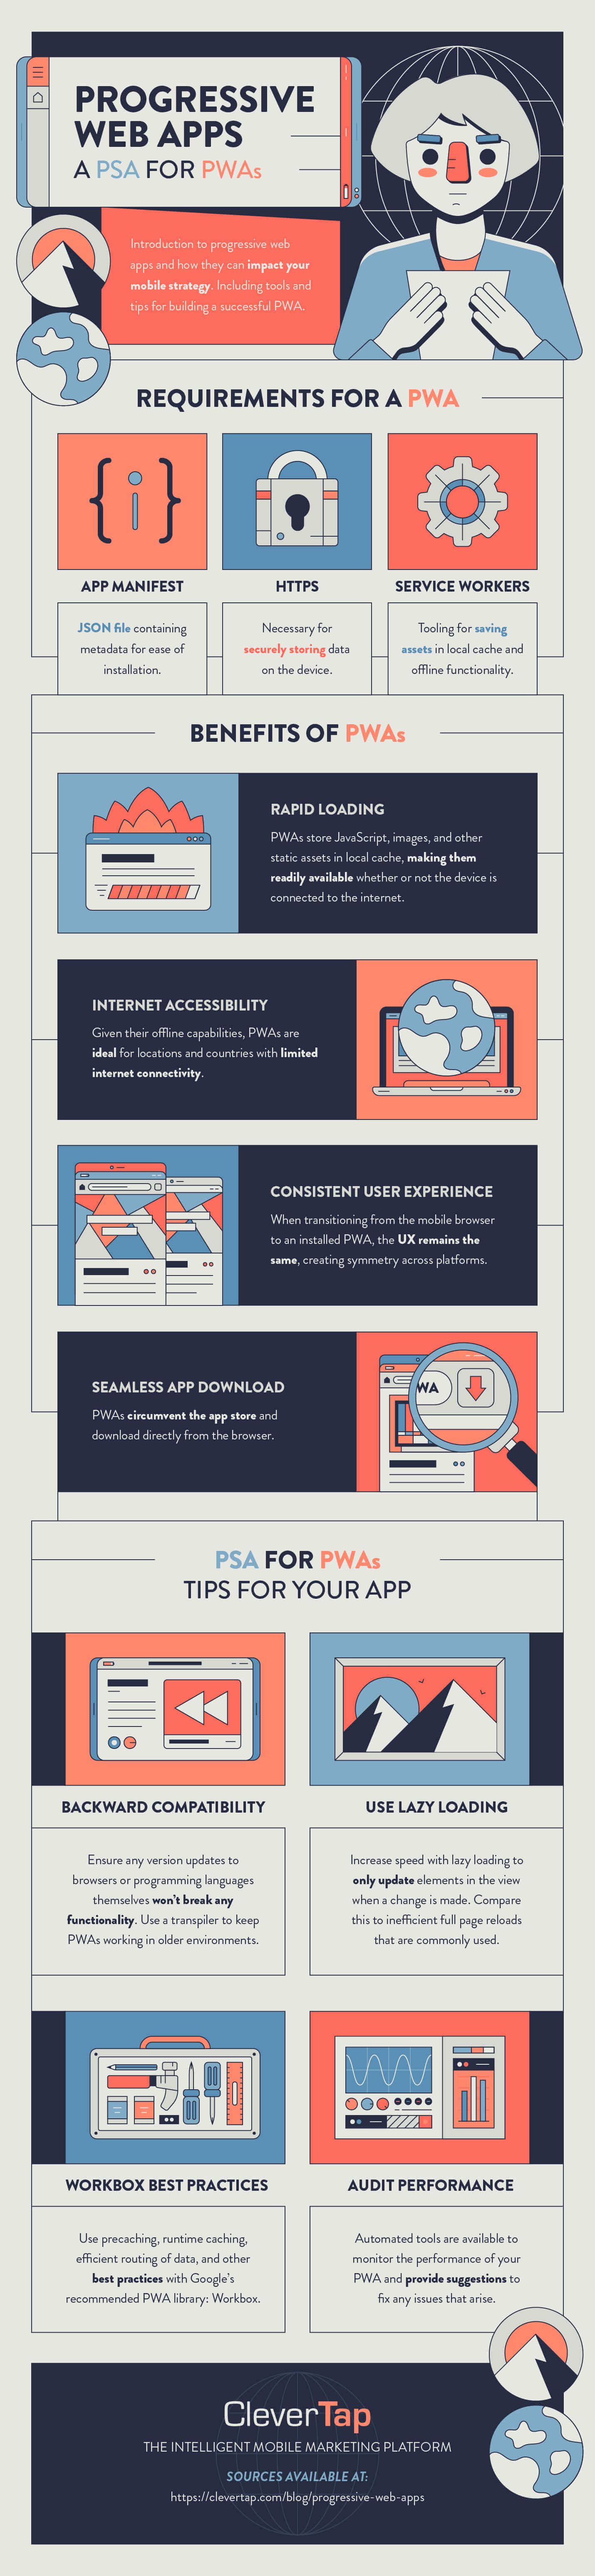 progressive web app infographic with definition, tips, and examples